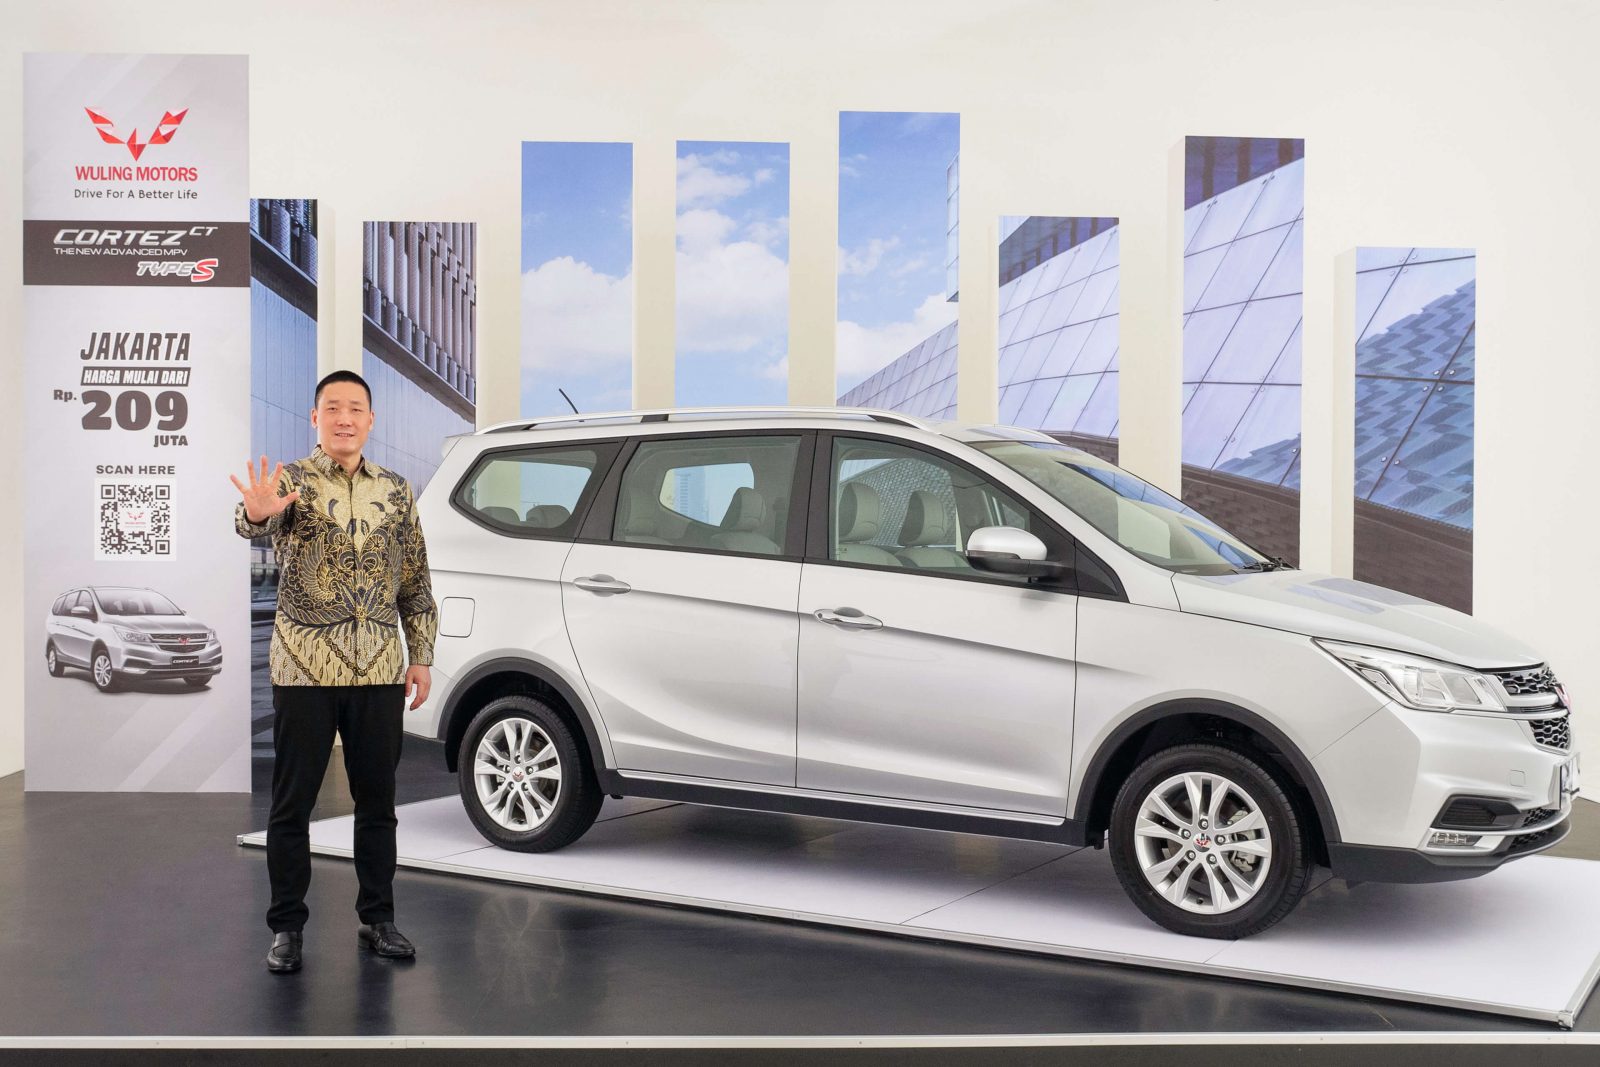 Image Wuling Introduces Cortez CT Type S in Indonesia